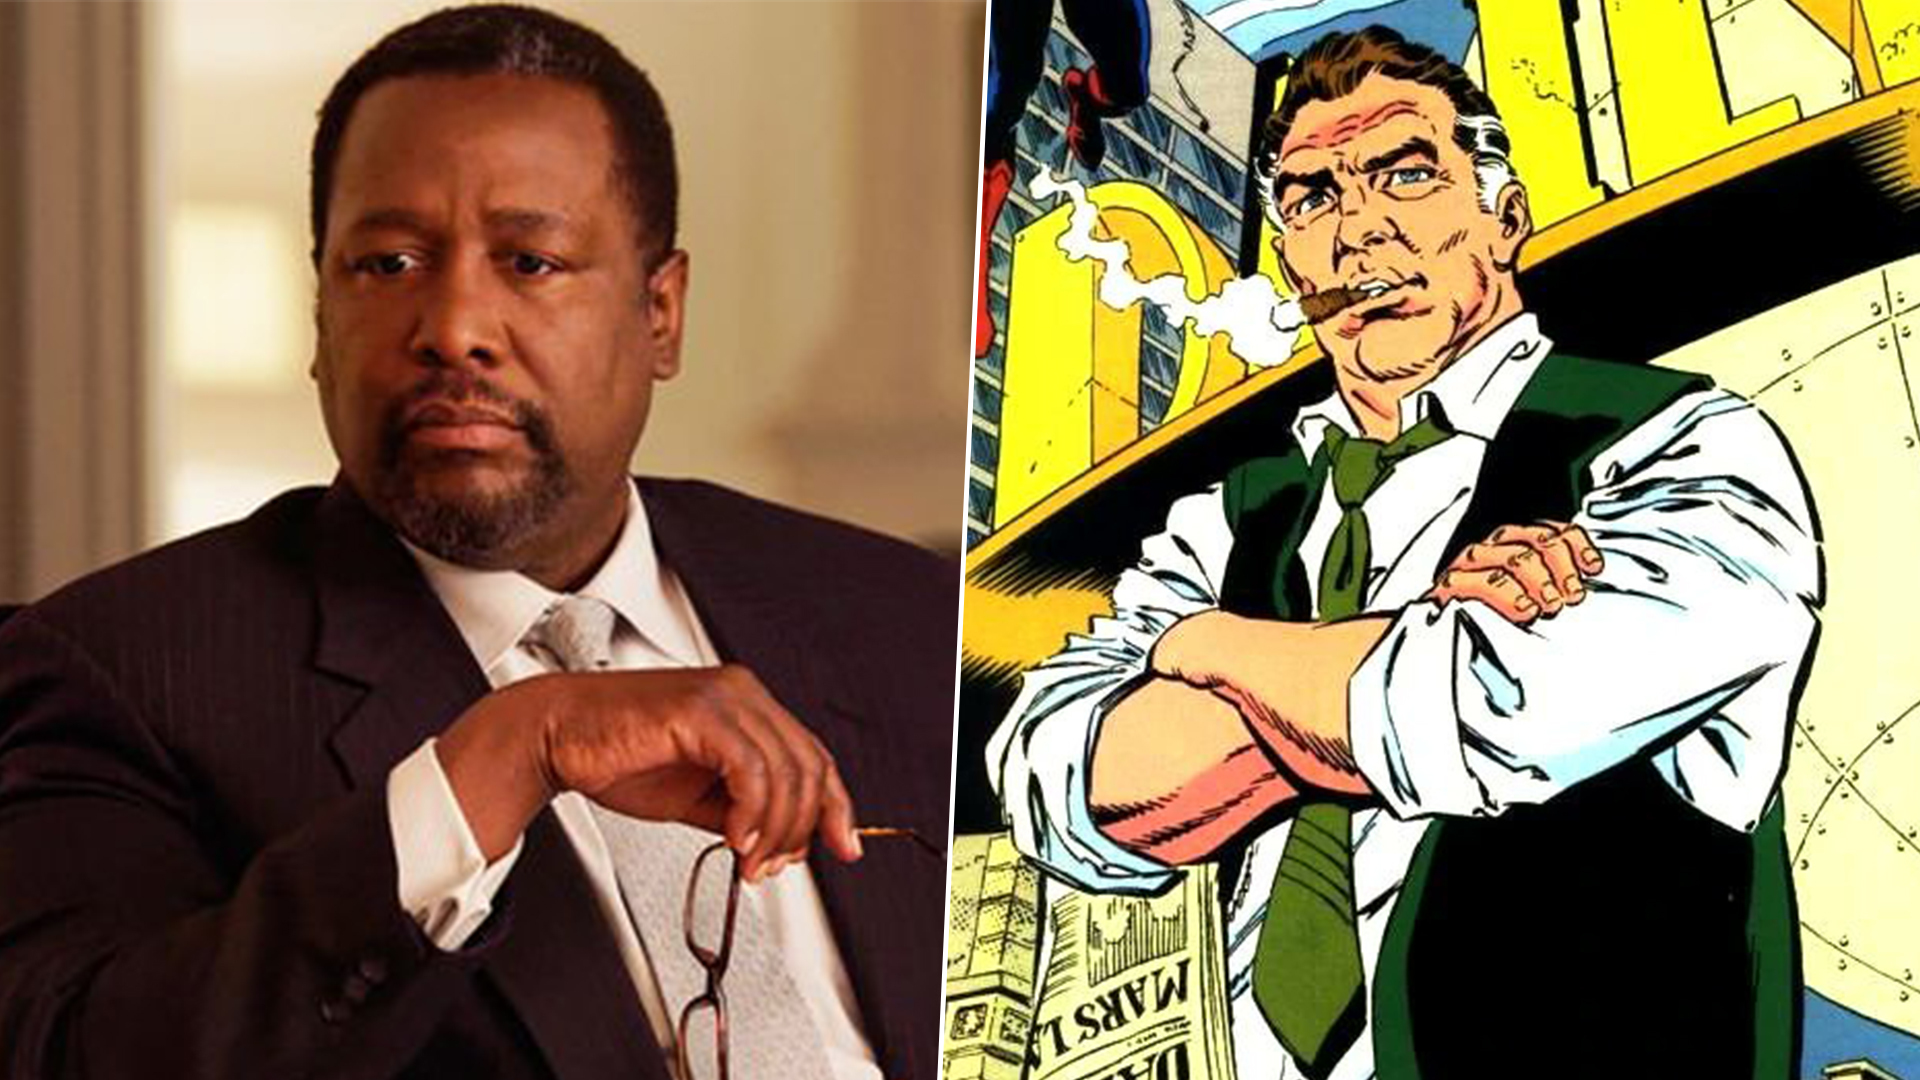 Suits and The Wire star cast in iconic Superman role in James Gunn’s DCU